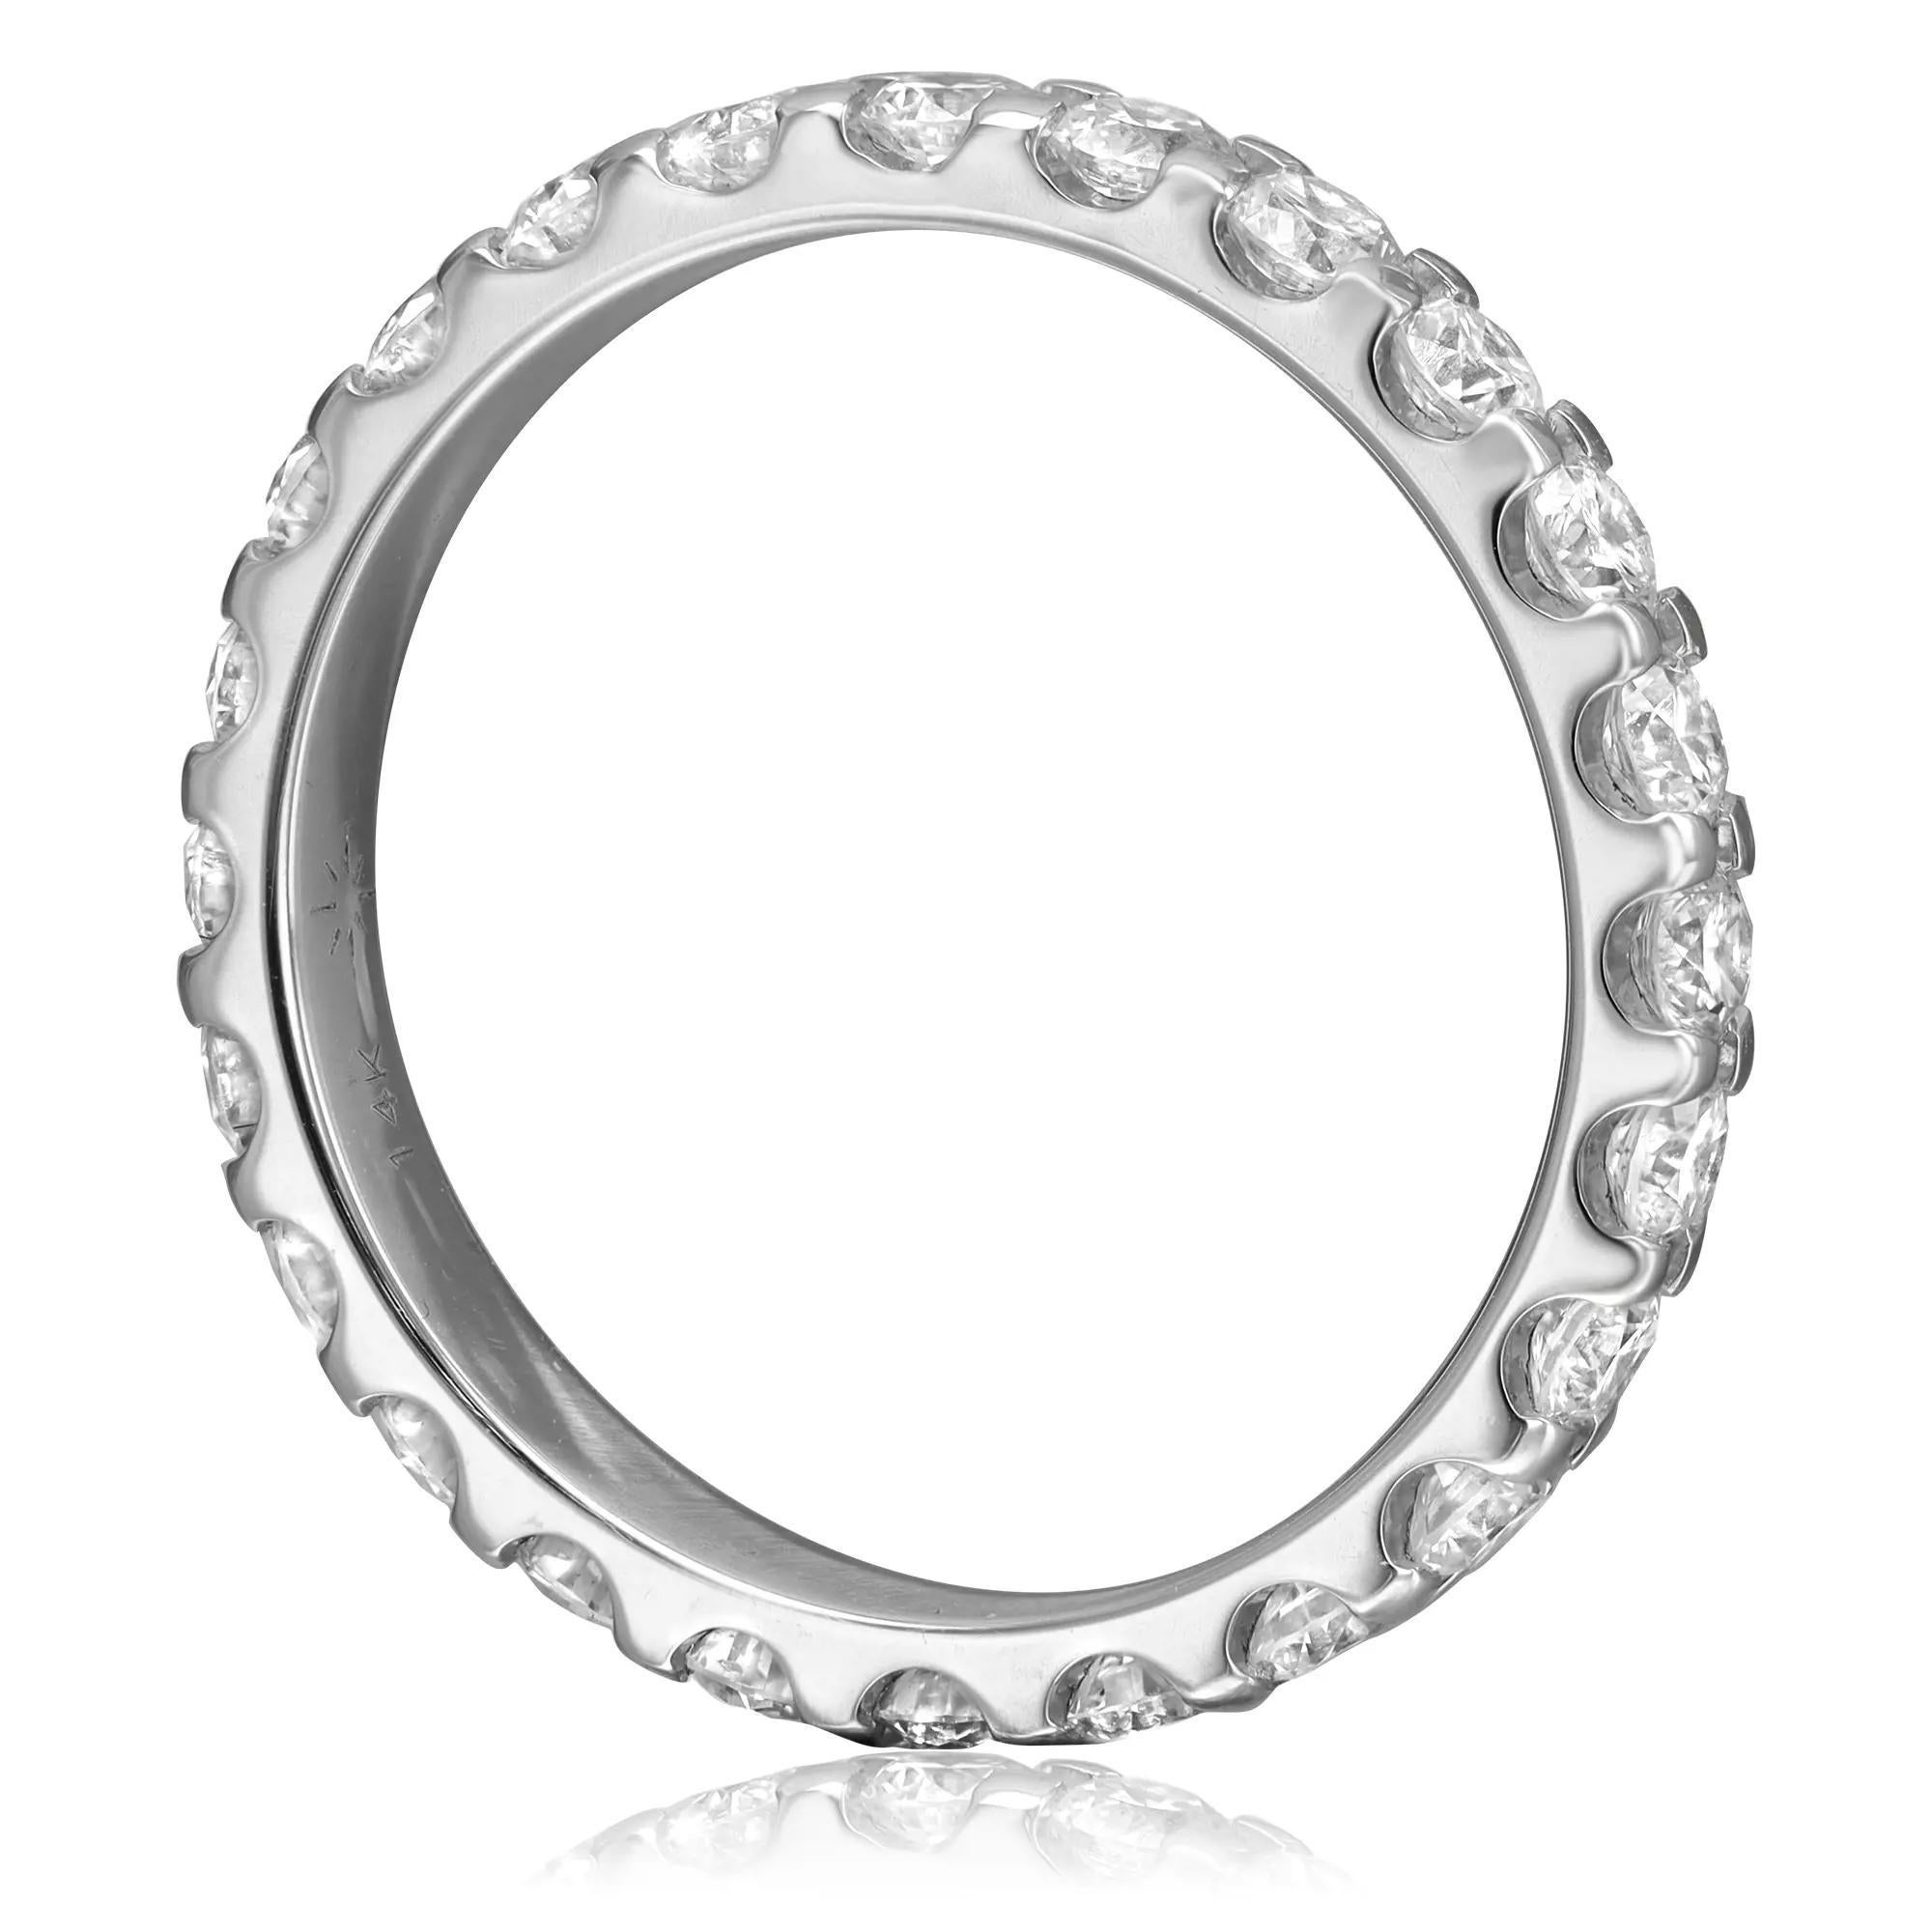 Modern 1.50Cttw Prong Set Round Cut Diamond Eternity Band Ring 14k White Gold For Sale